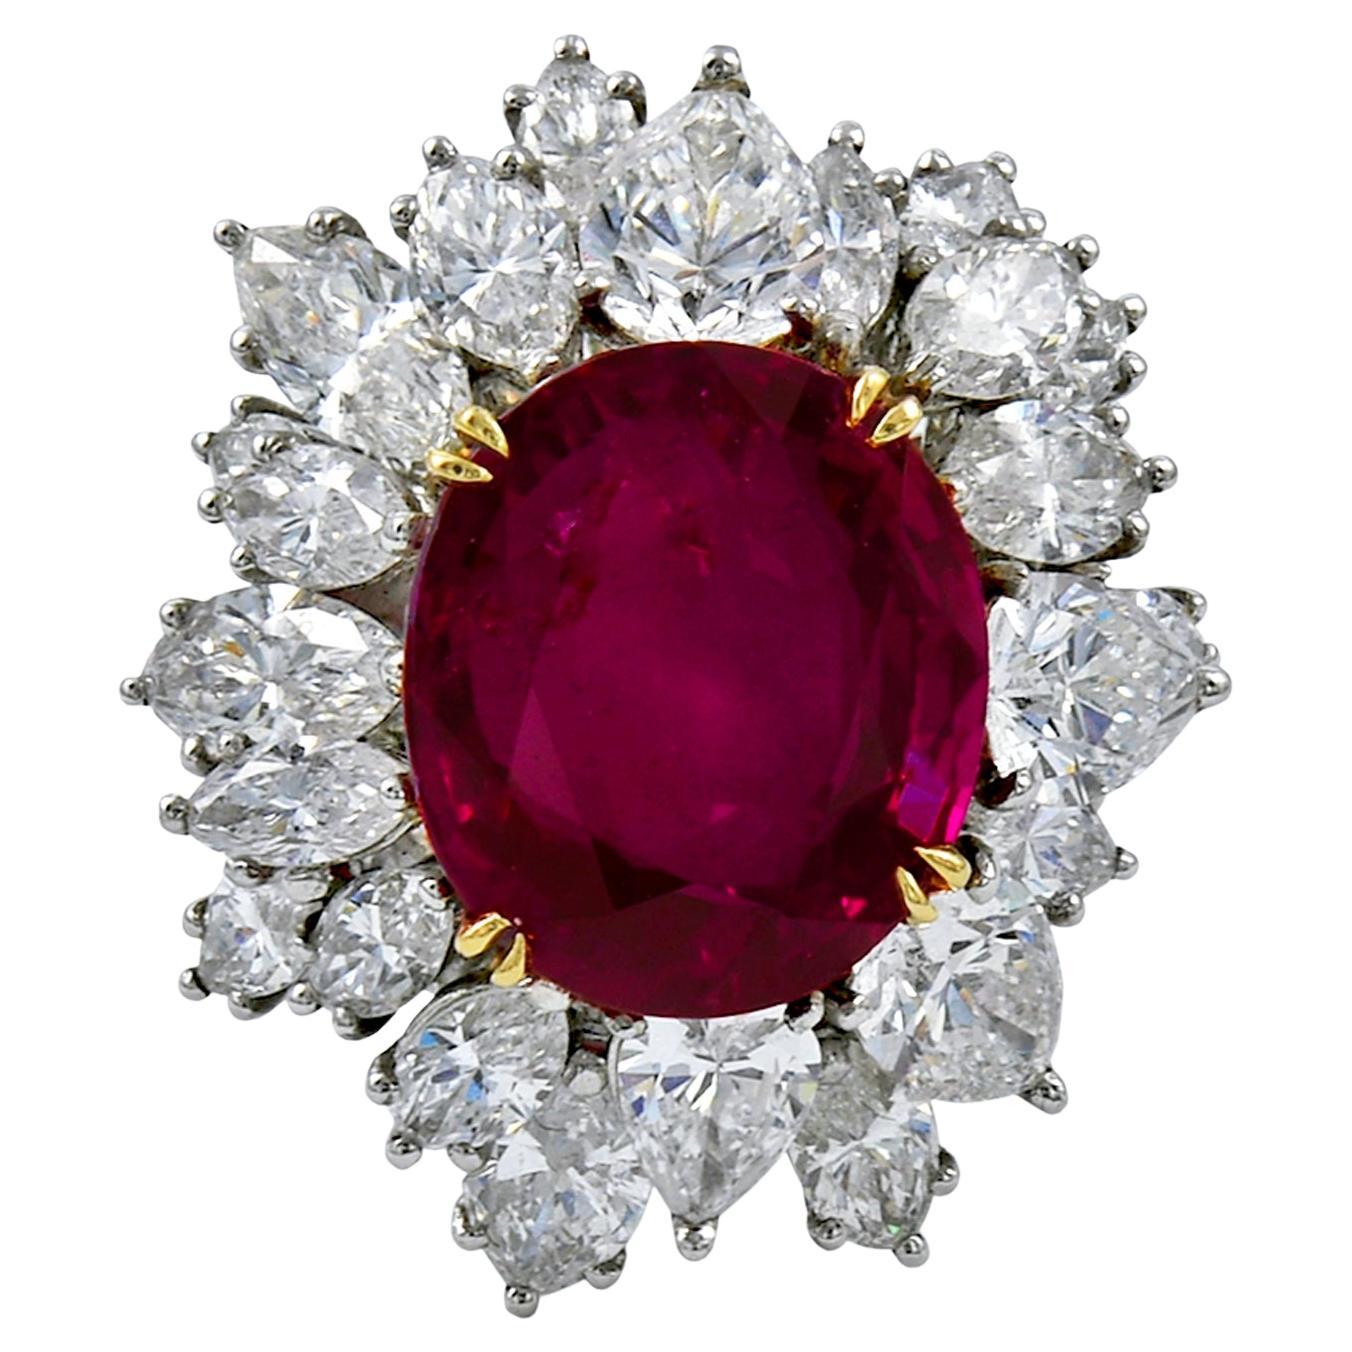 Spectra Fine Jewelry, Certified 7.91 Carat Burmese Ruby Diamond Cocktail Ring For Sale